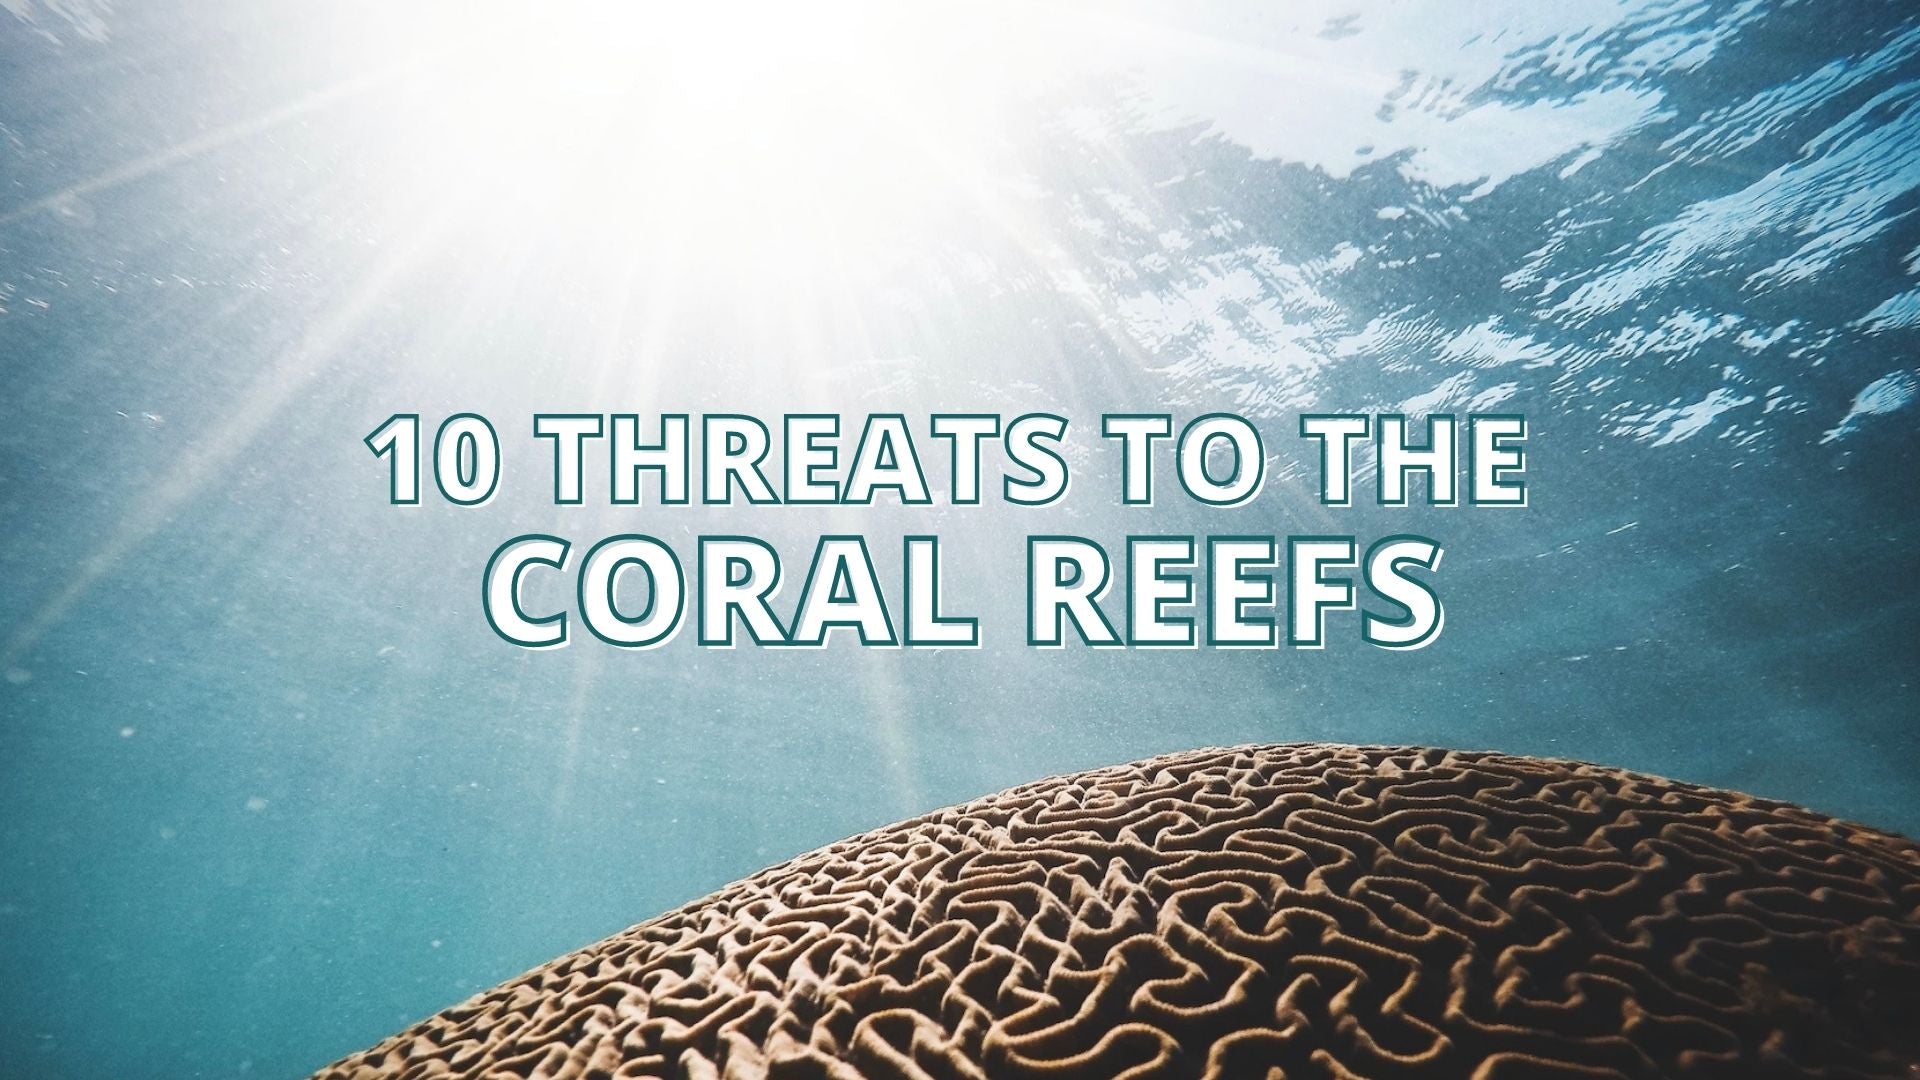 10 Threats to Coral reefs